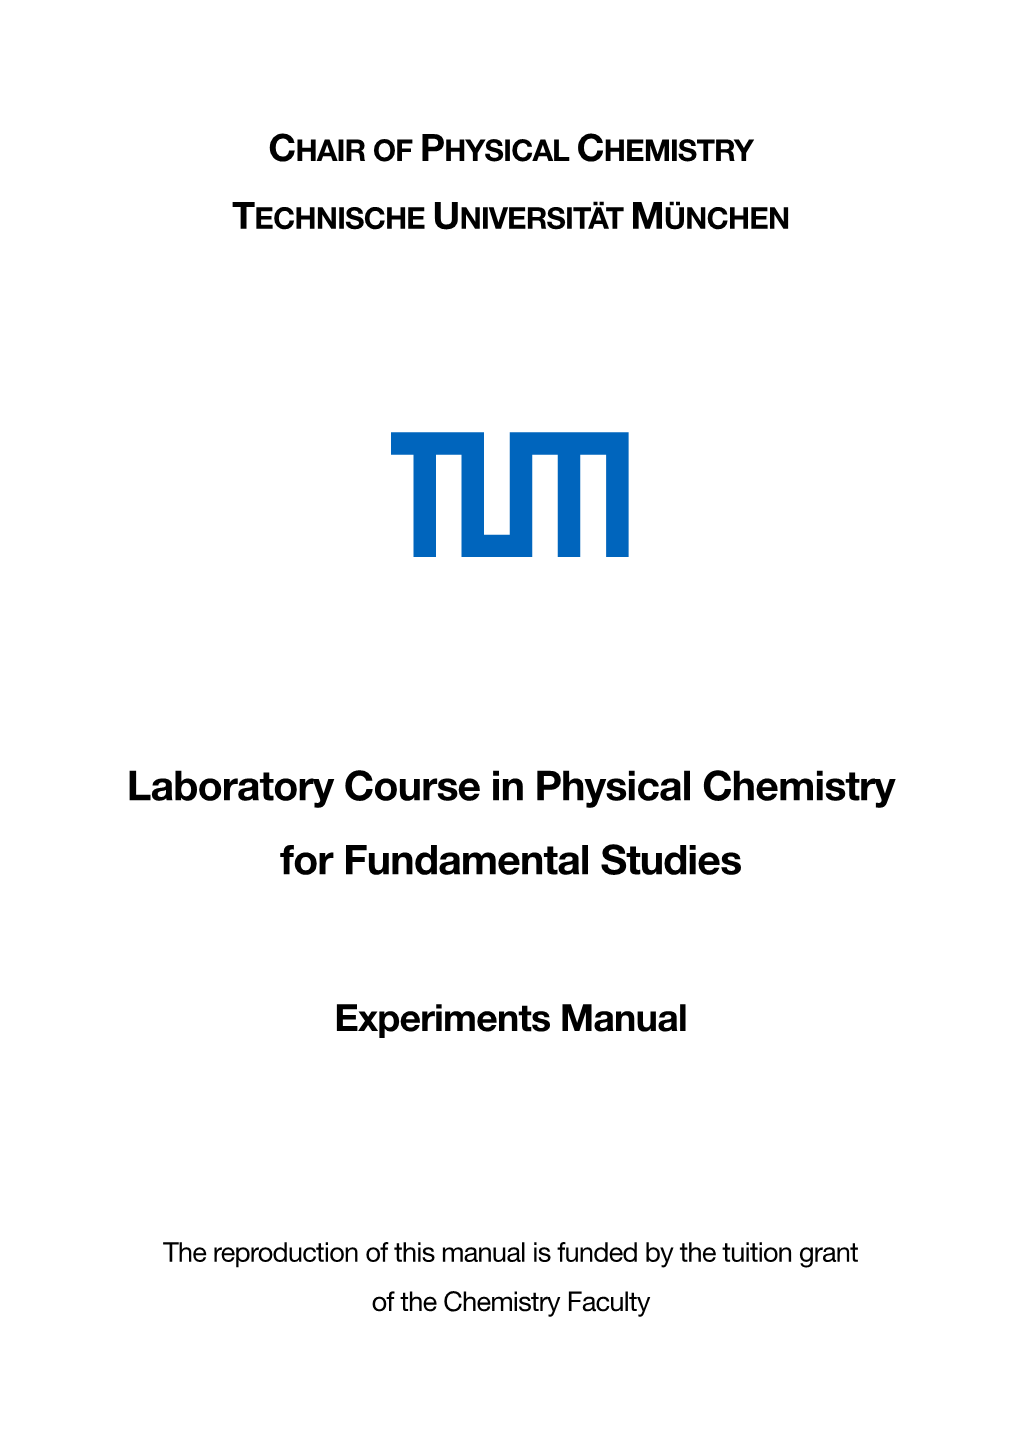 Laboratory Course in Physical Chemistry for Fundamental Studies